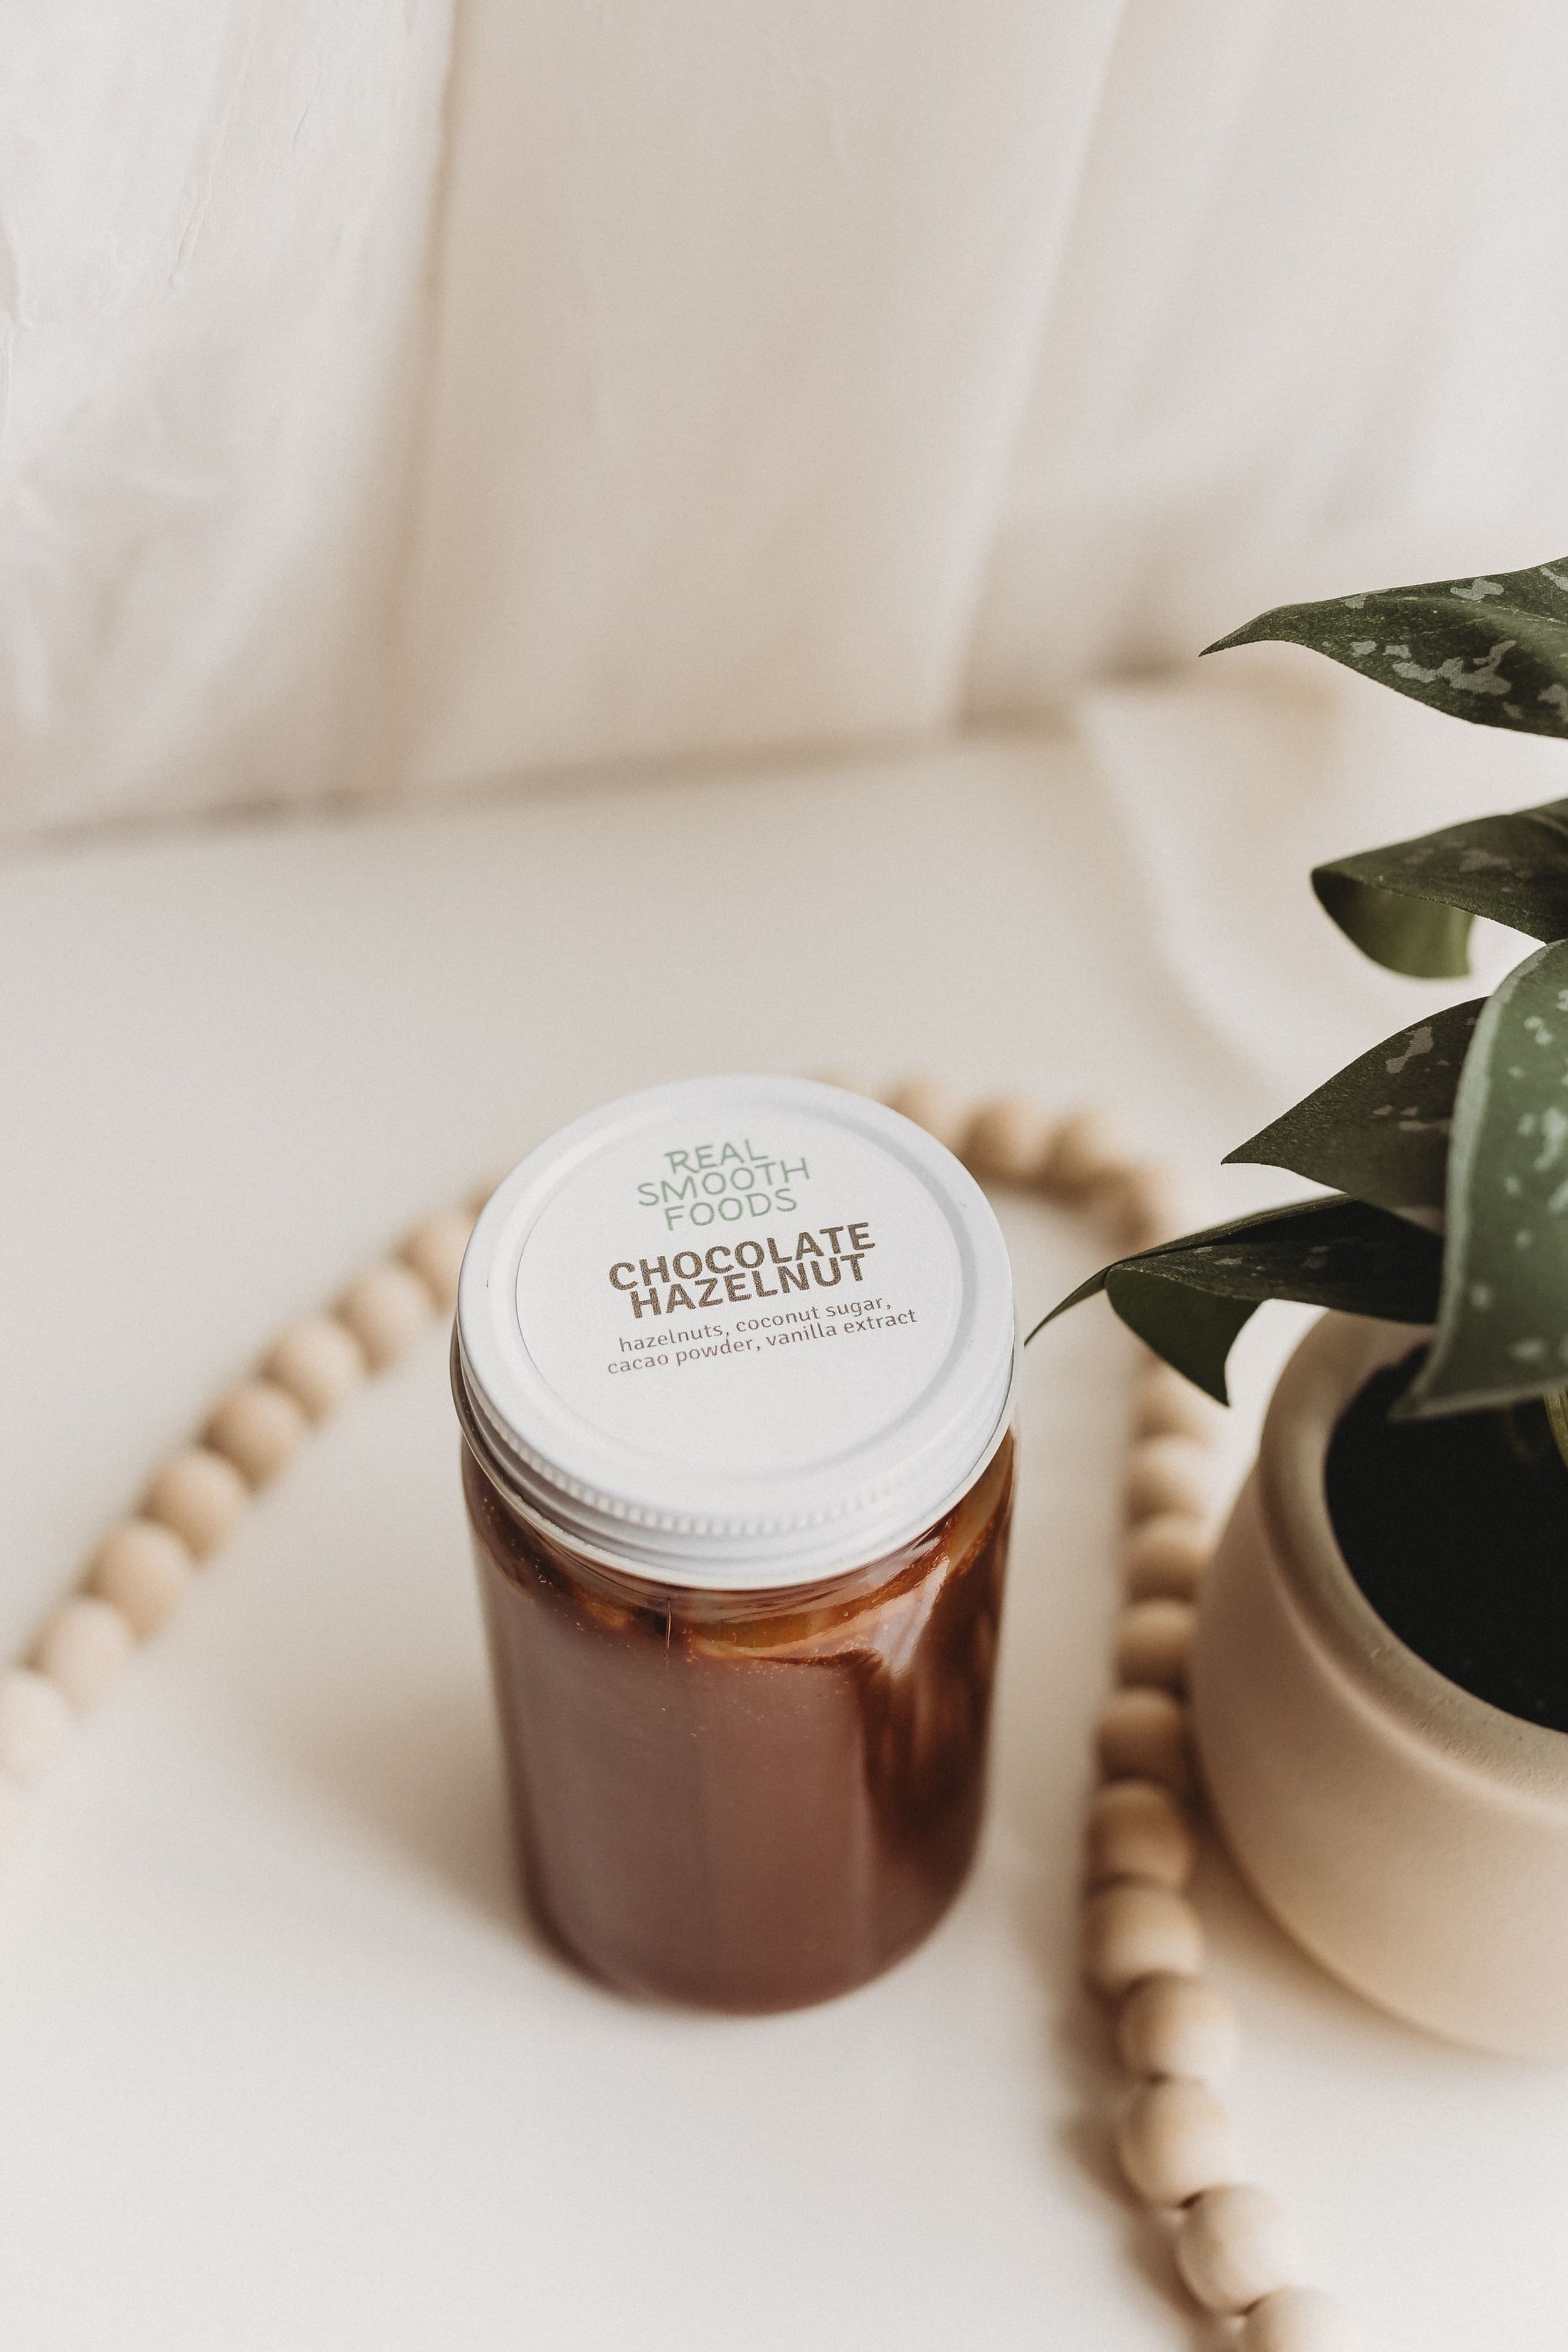  a jar of handmade chocolate hazelnut spread sits on a white backdrop during food product photography 